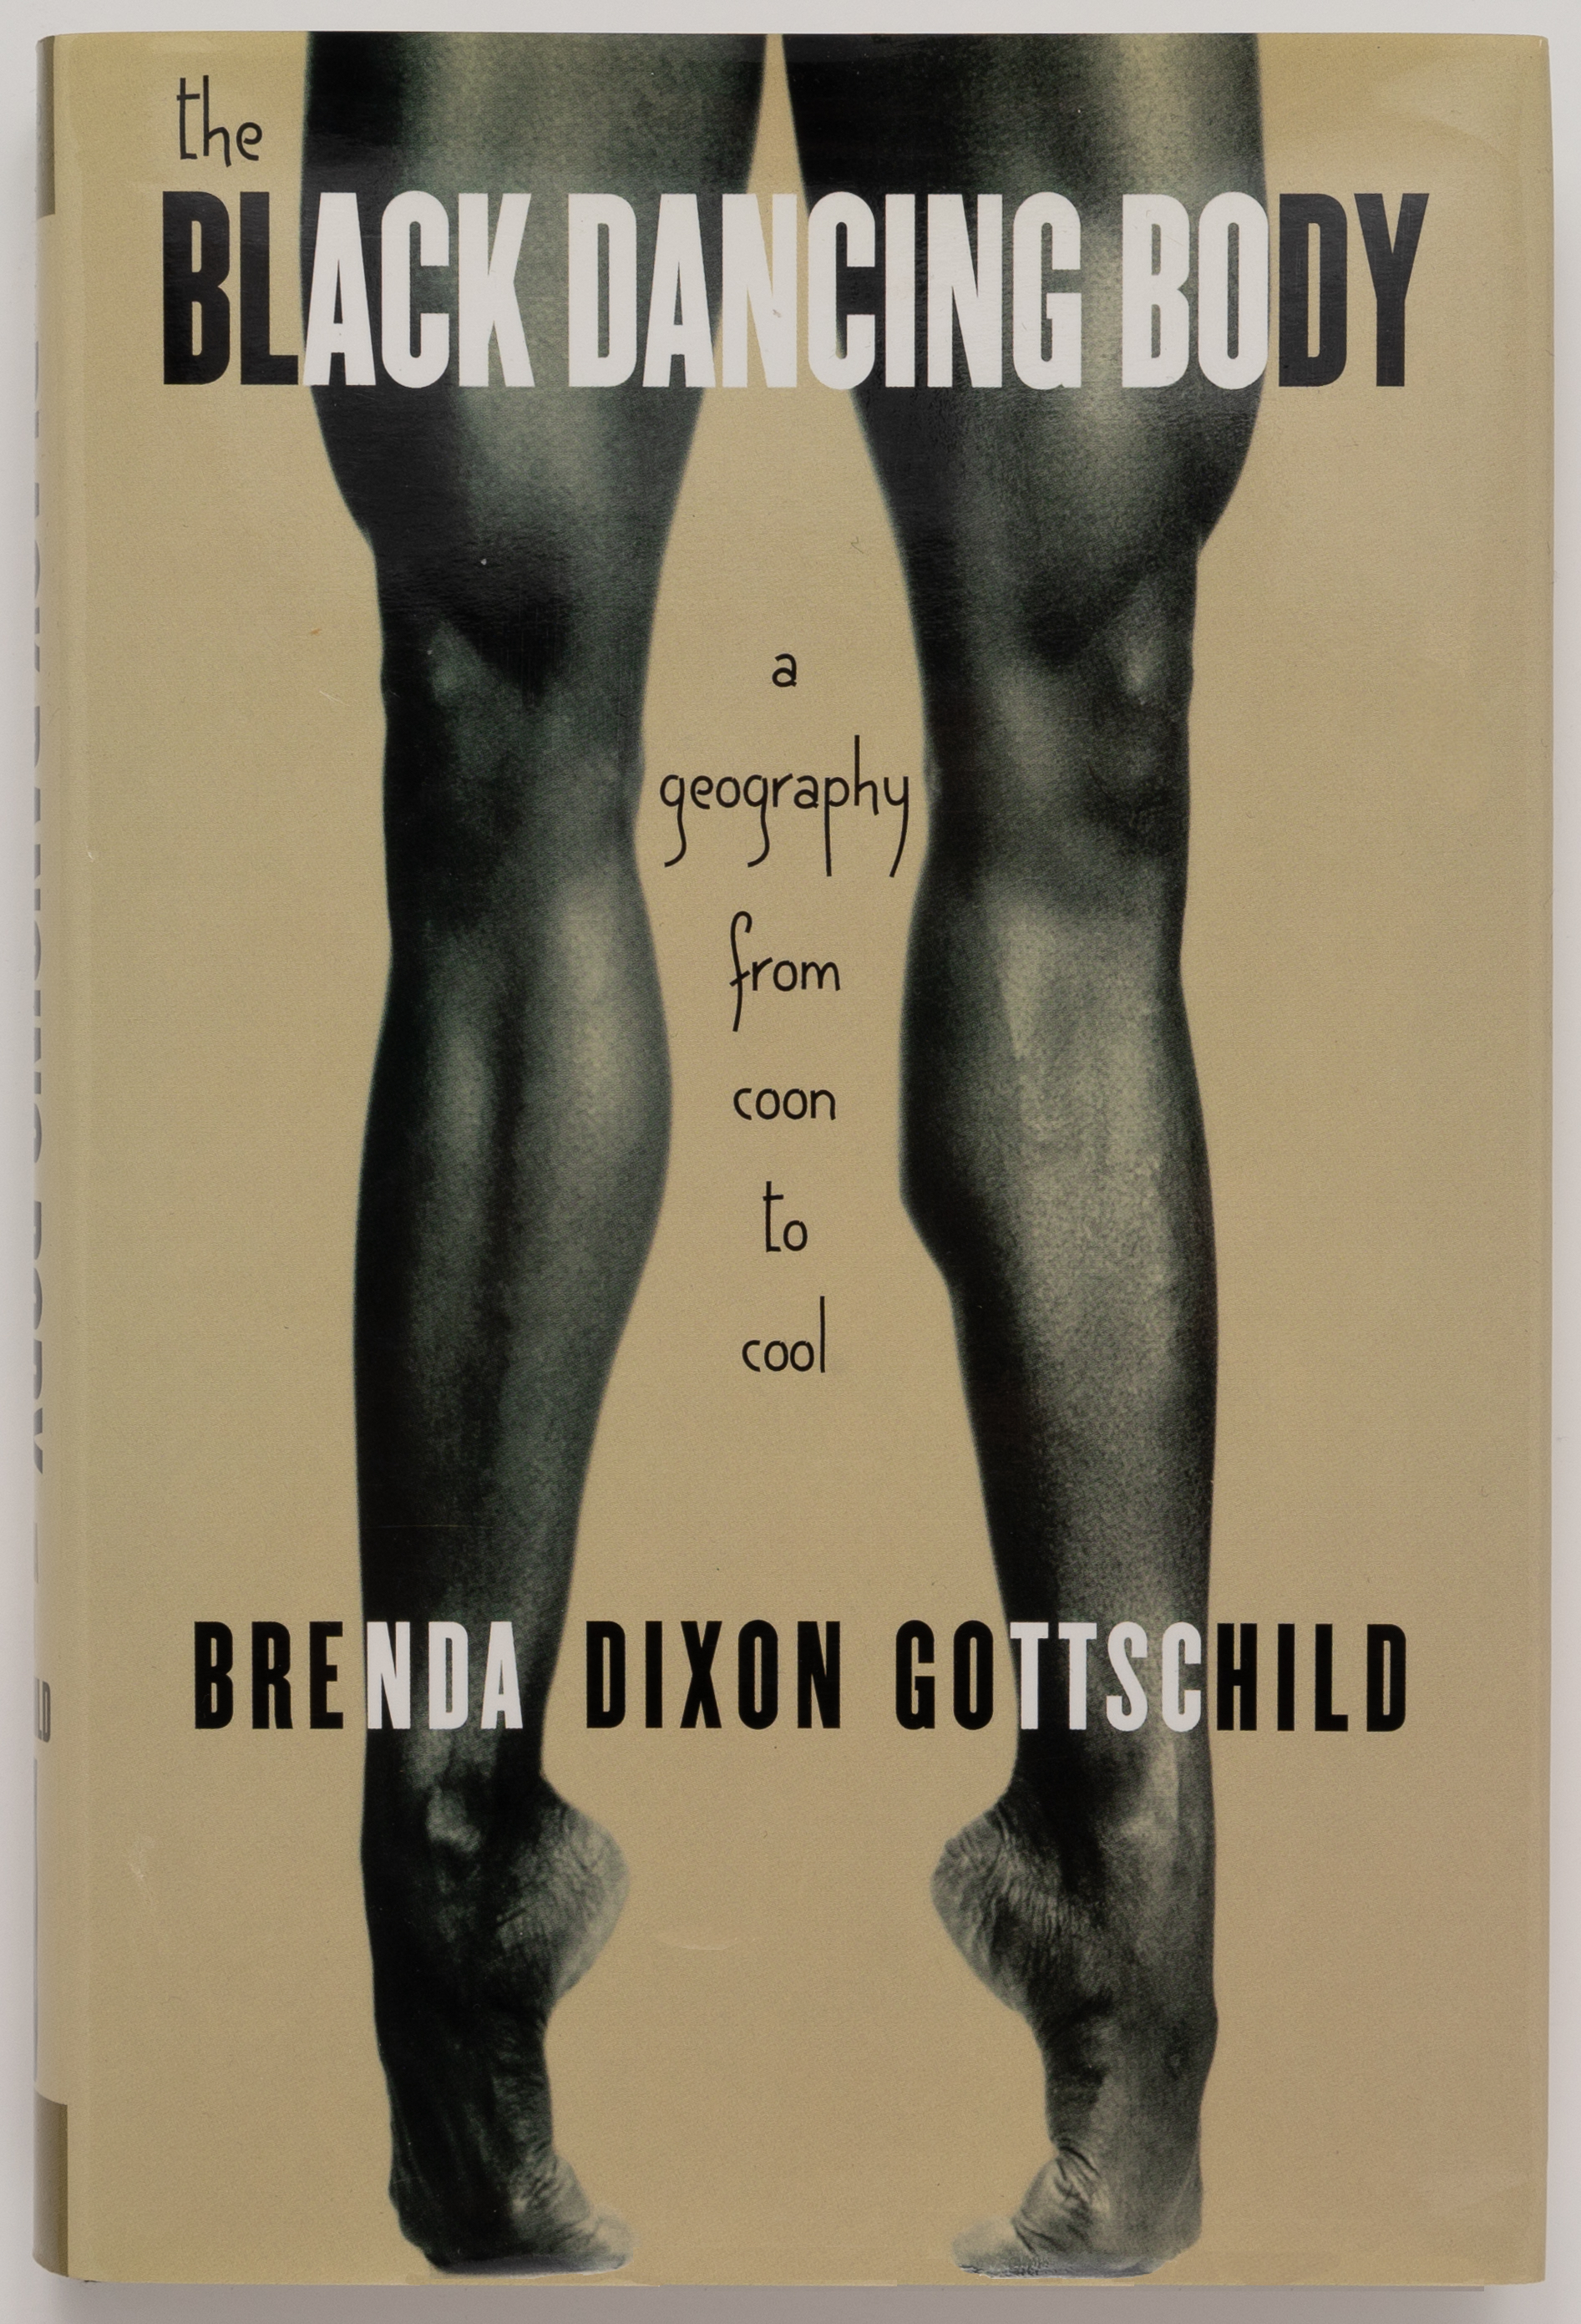 The Black Dancing Body: A Geography from Coon to Cool - Brenda Dixon Gottschild